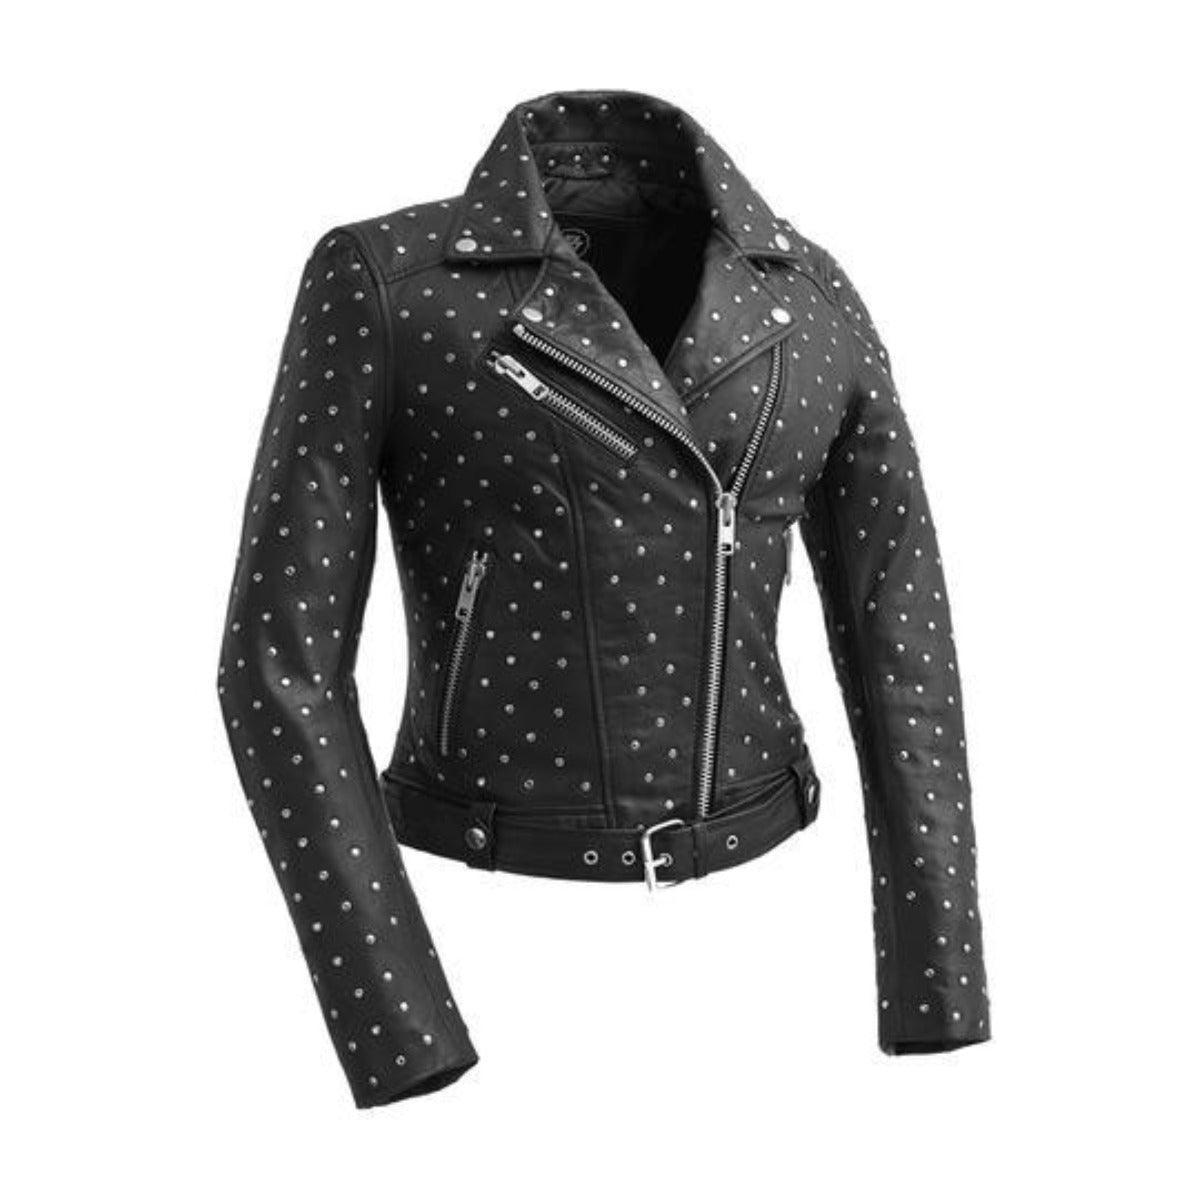 First Manufacturing Claudia - Women's Leather Jacket, Black - American Legend Rider